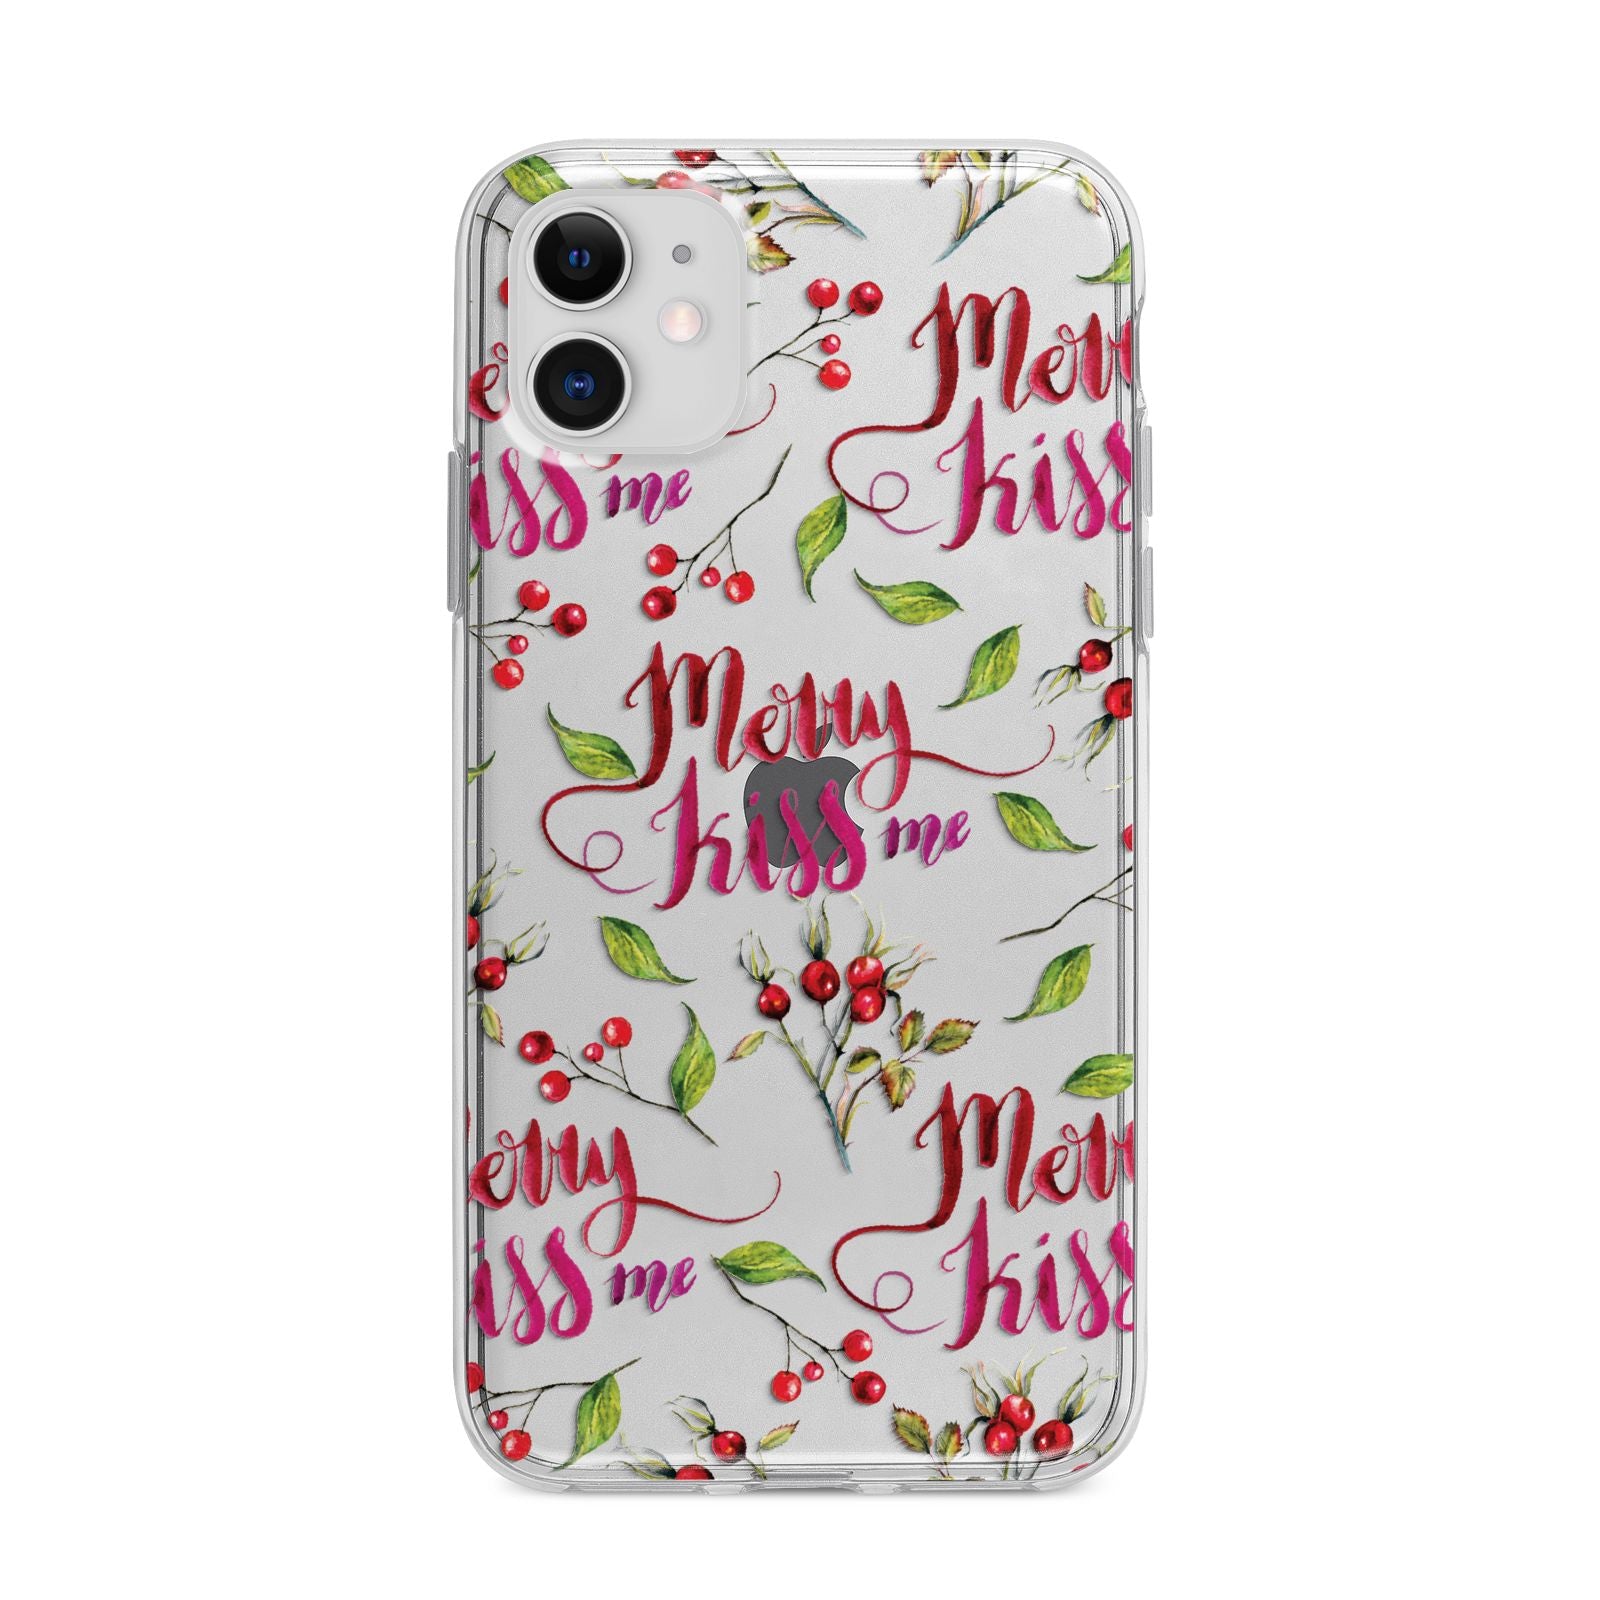 Merry kiss me Apple iPhone 11 in White with Bumper Case